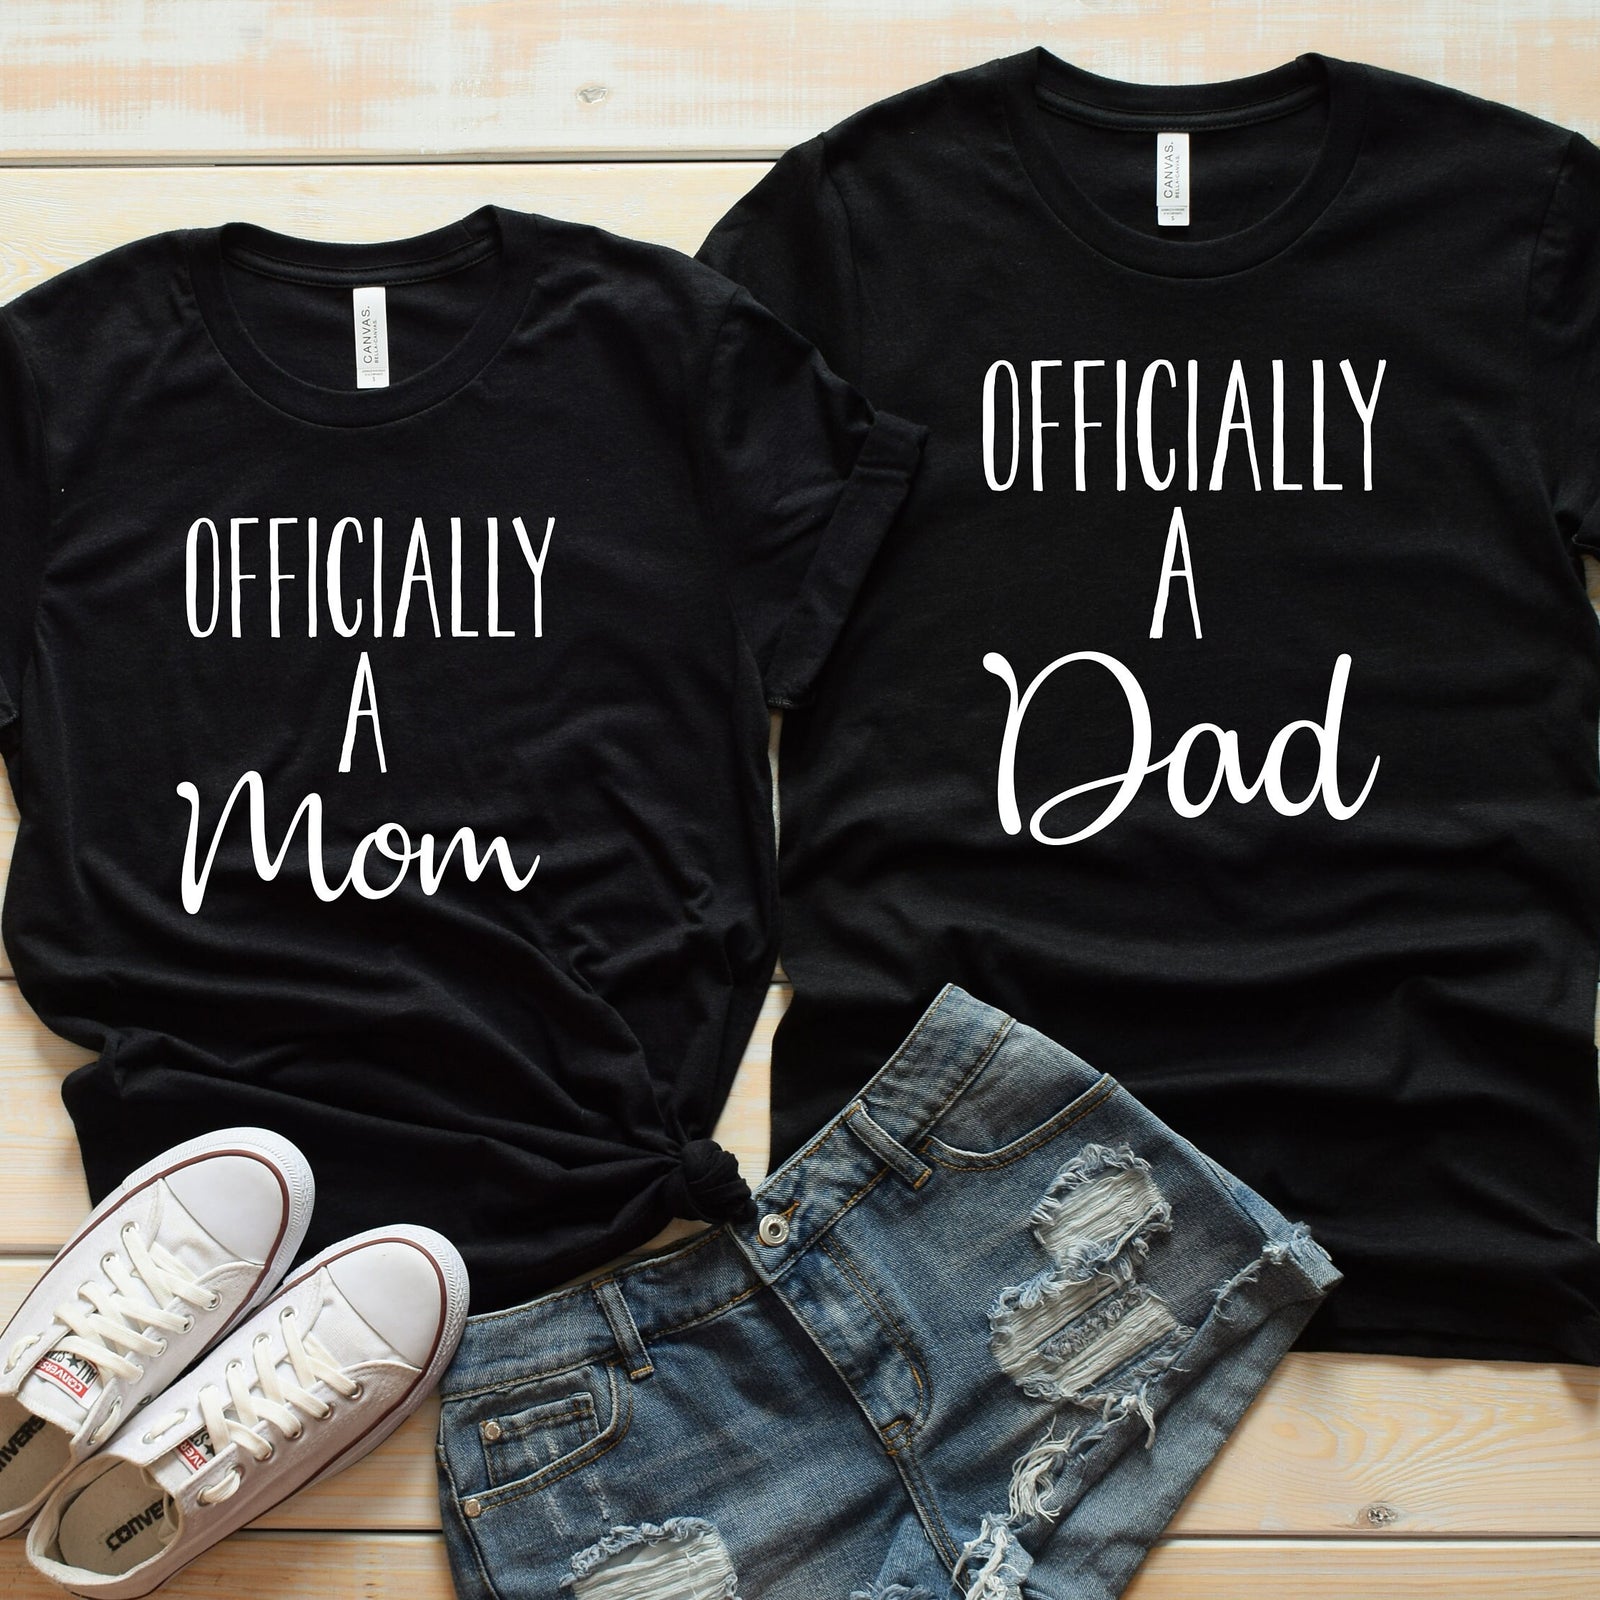 Officially a Mom - Offically a Dad - Matching Shirts - Cute Pregnancy Announcement - Adoption Shirts